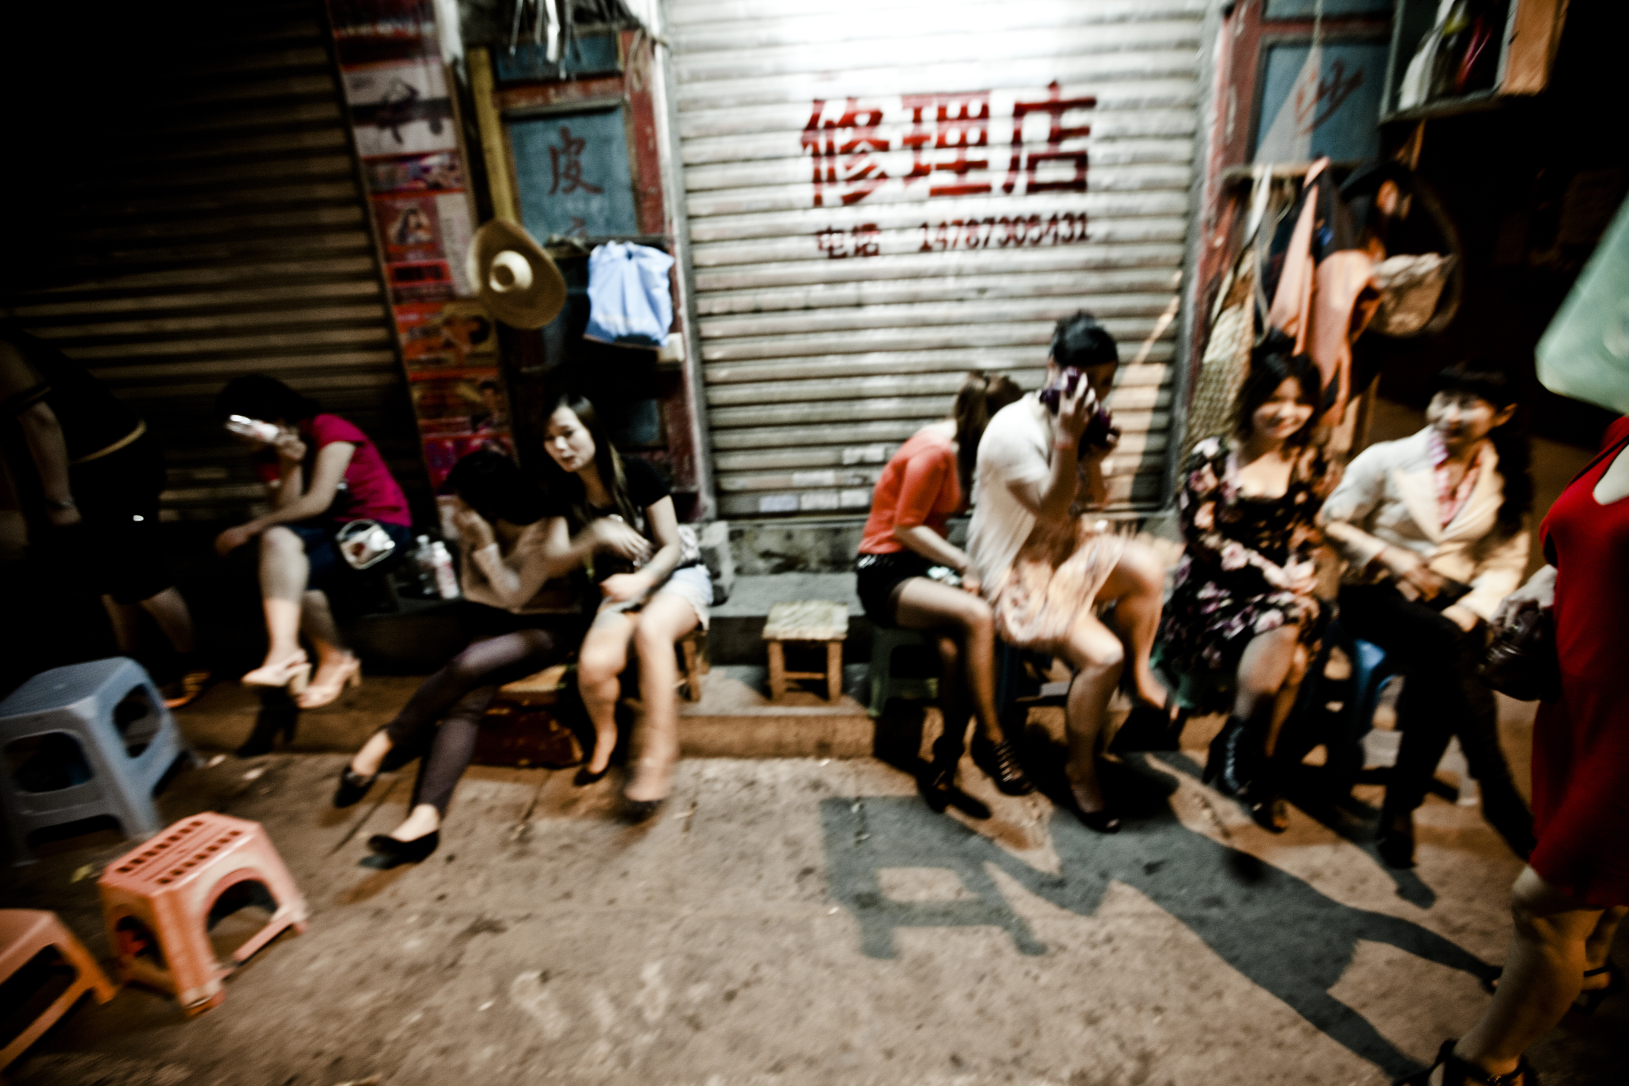 Prostitutes on the streets of downtown Ruili, Yunnan Province. A town known for trafficking woman. Photo: SCMP